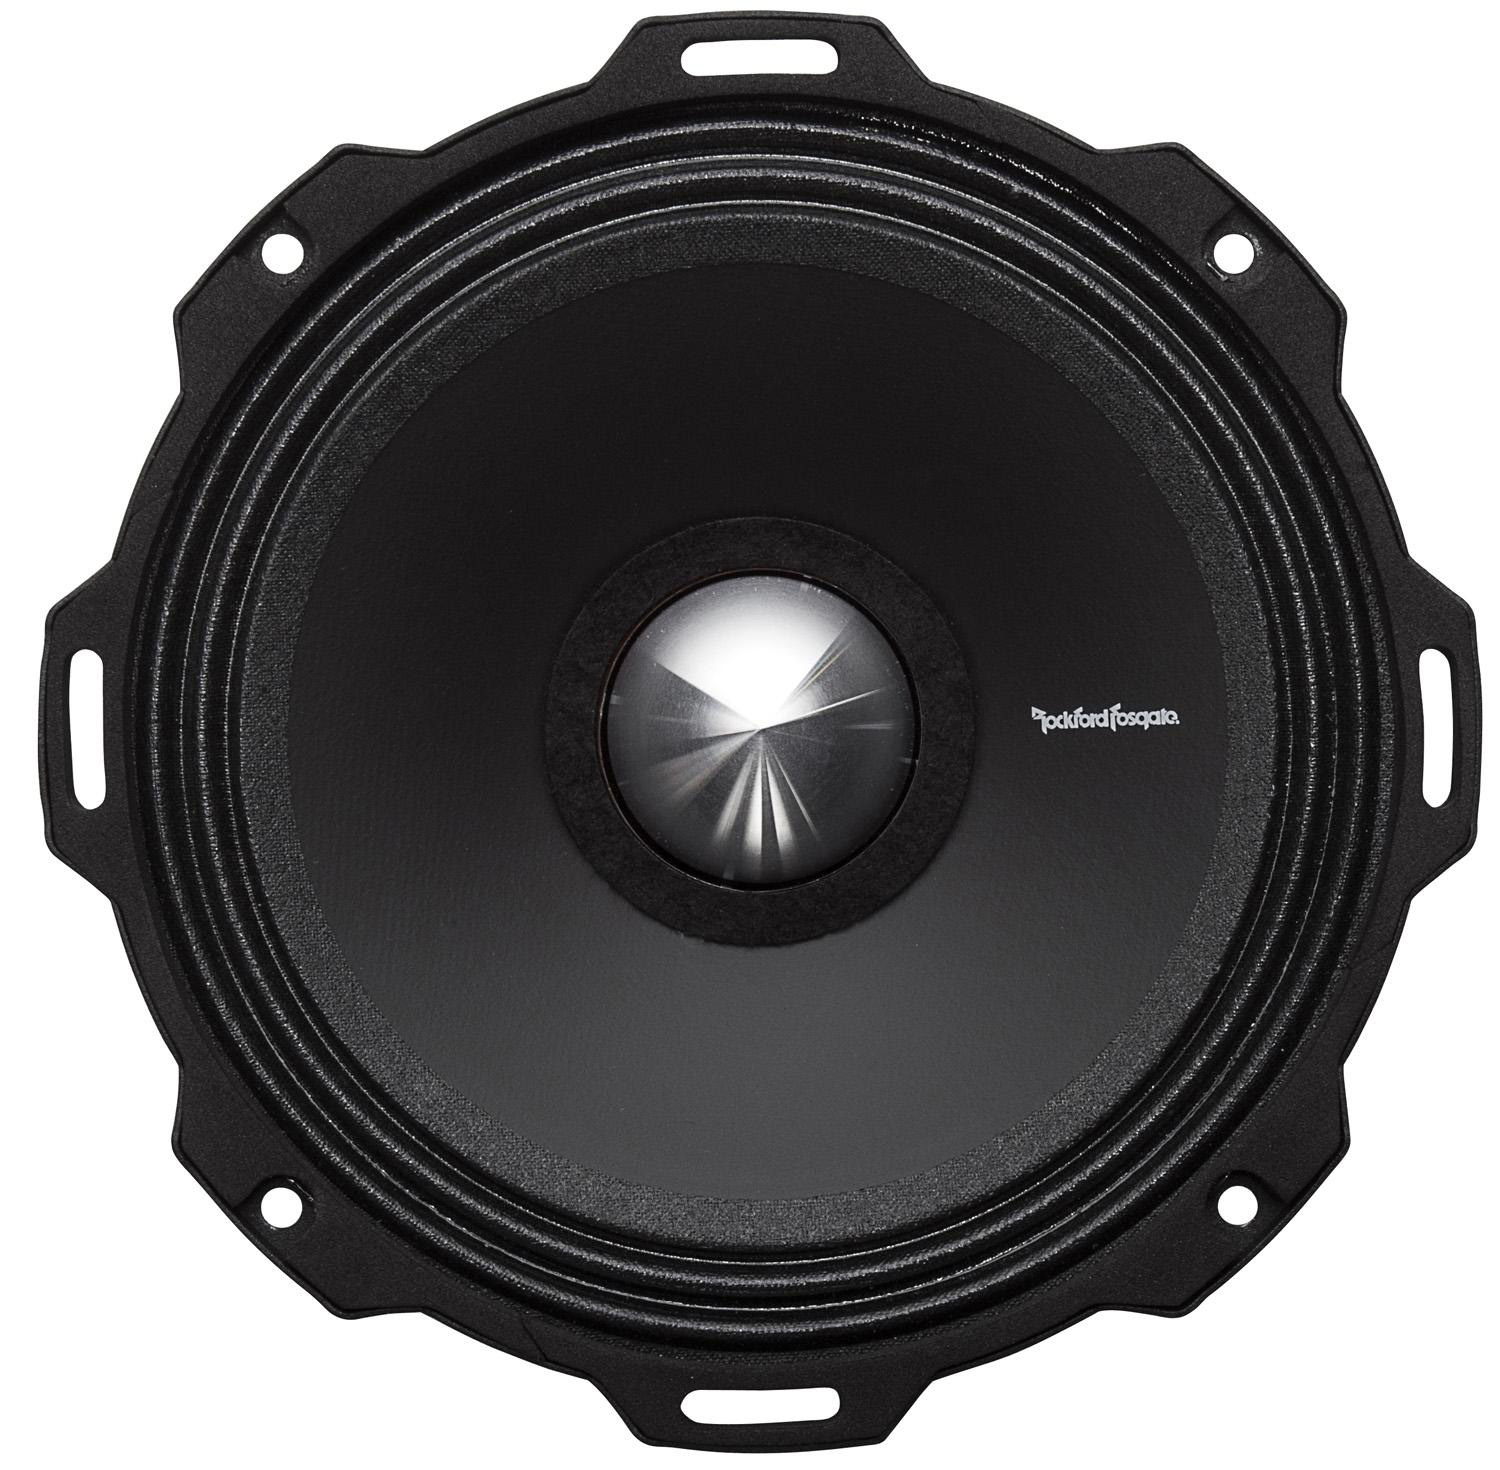 ROCKFORD FOSGATE PUNCH PRO Mid-Bass PPS4-10 Mid Bass Mitteltöner 350 WRMS 4 Ohm